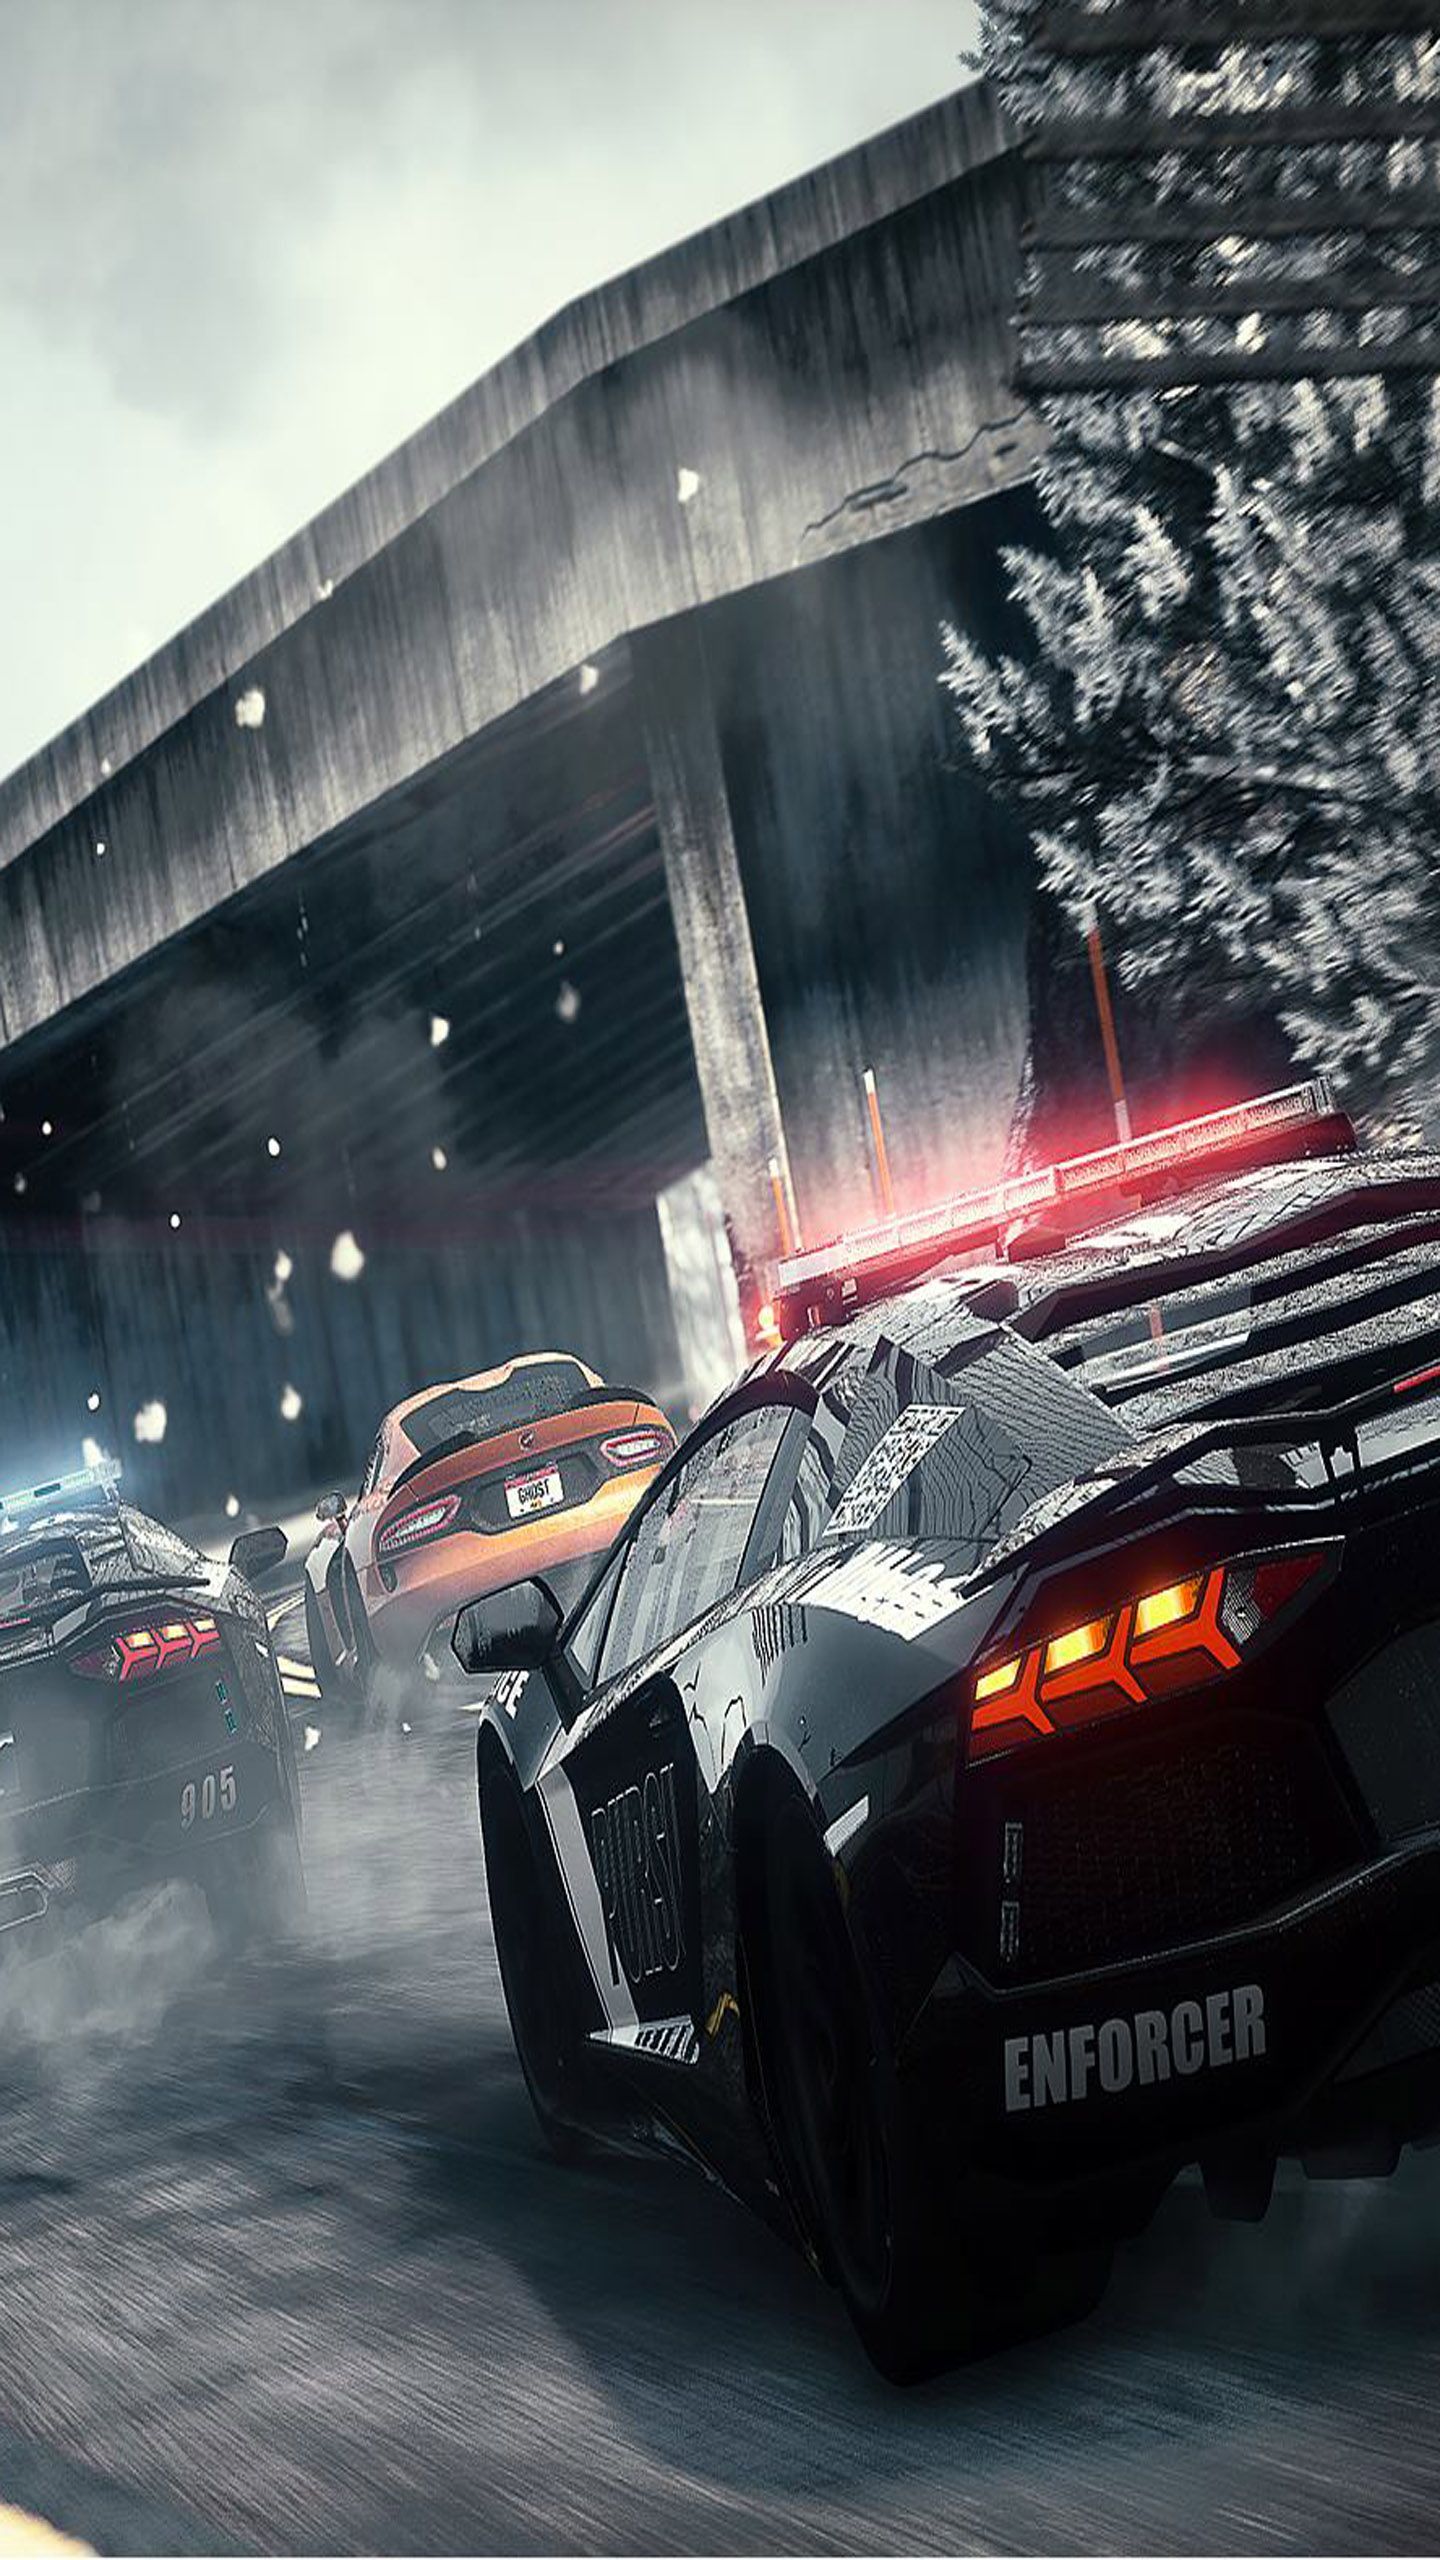 Best NFS Police Departments image. Police, Need for speed